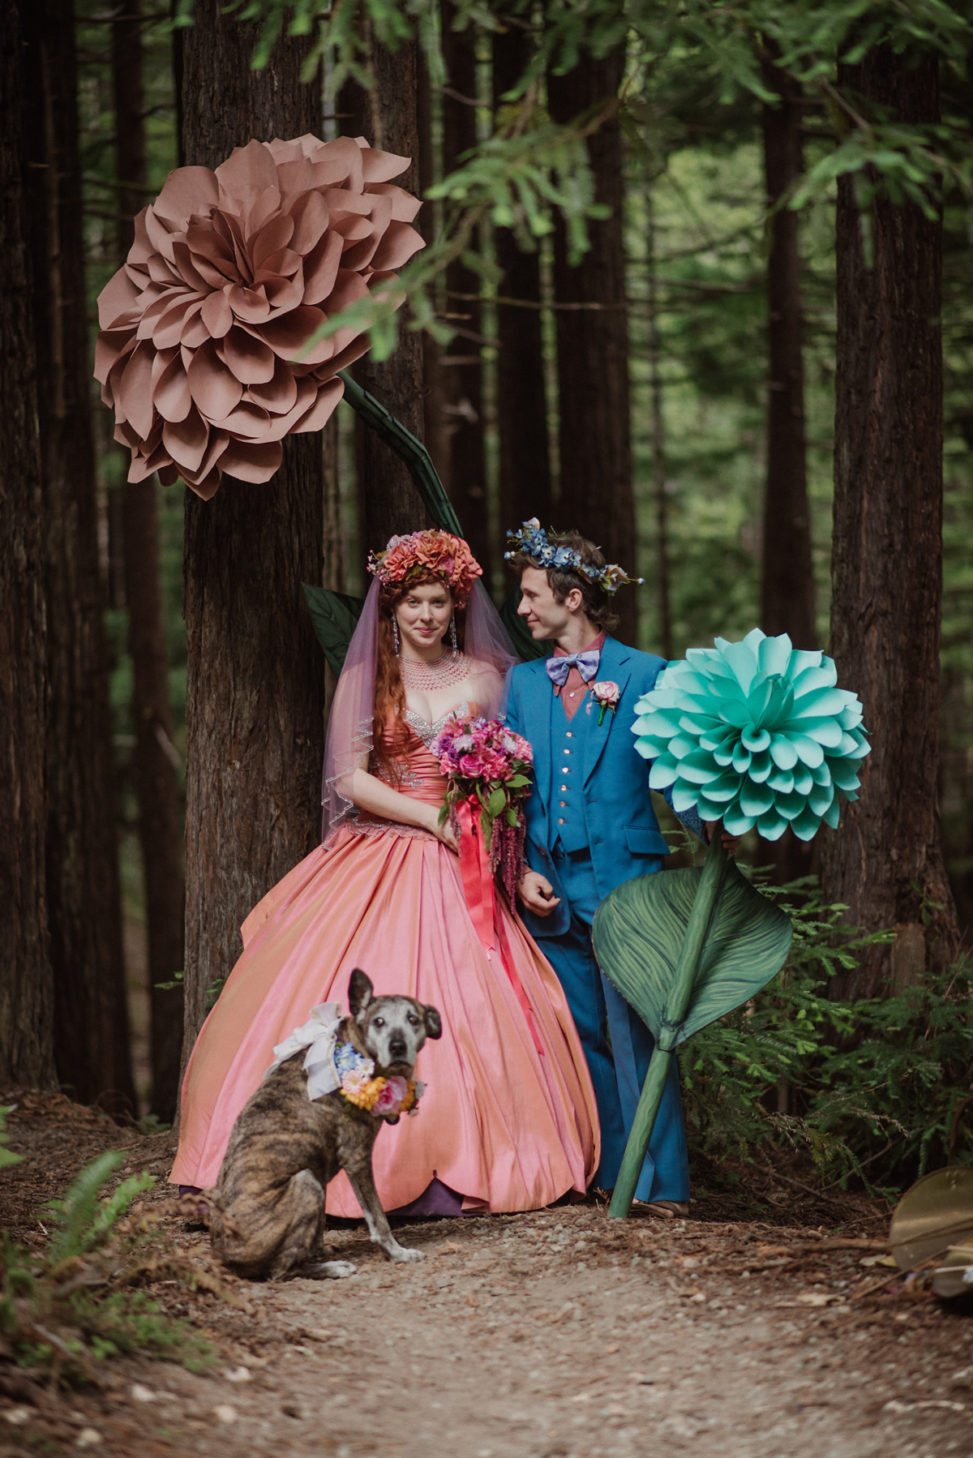 couple wearing colorful Victorian style outfits with with artificial flowers and a dog